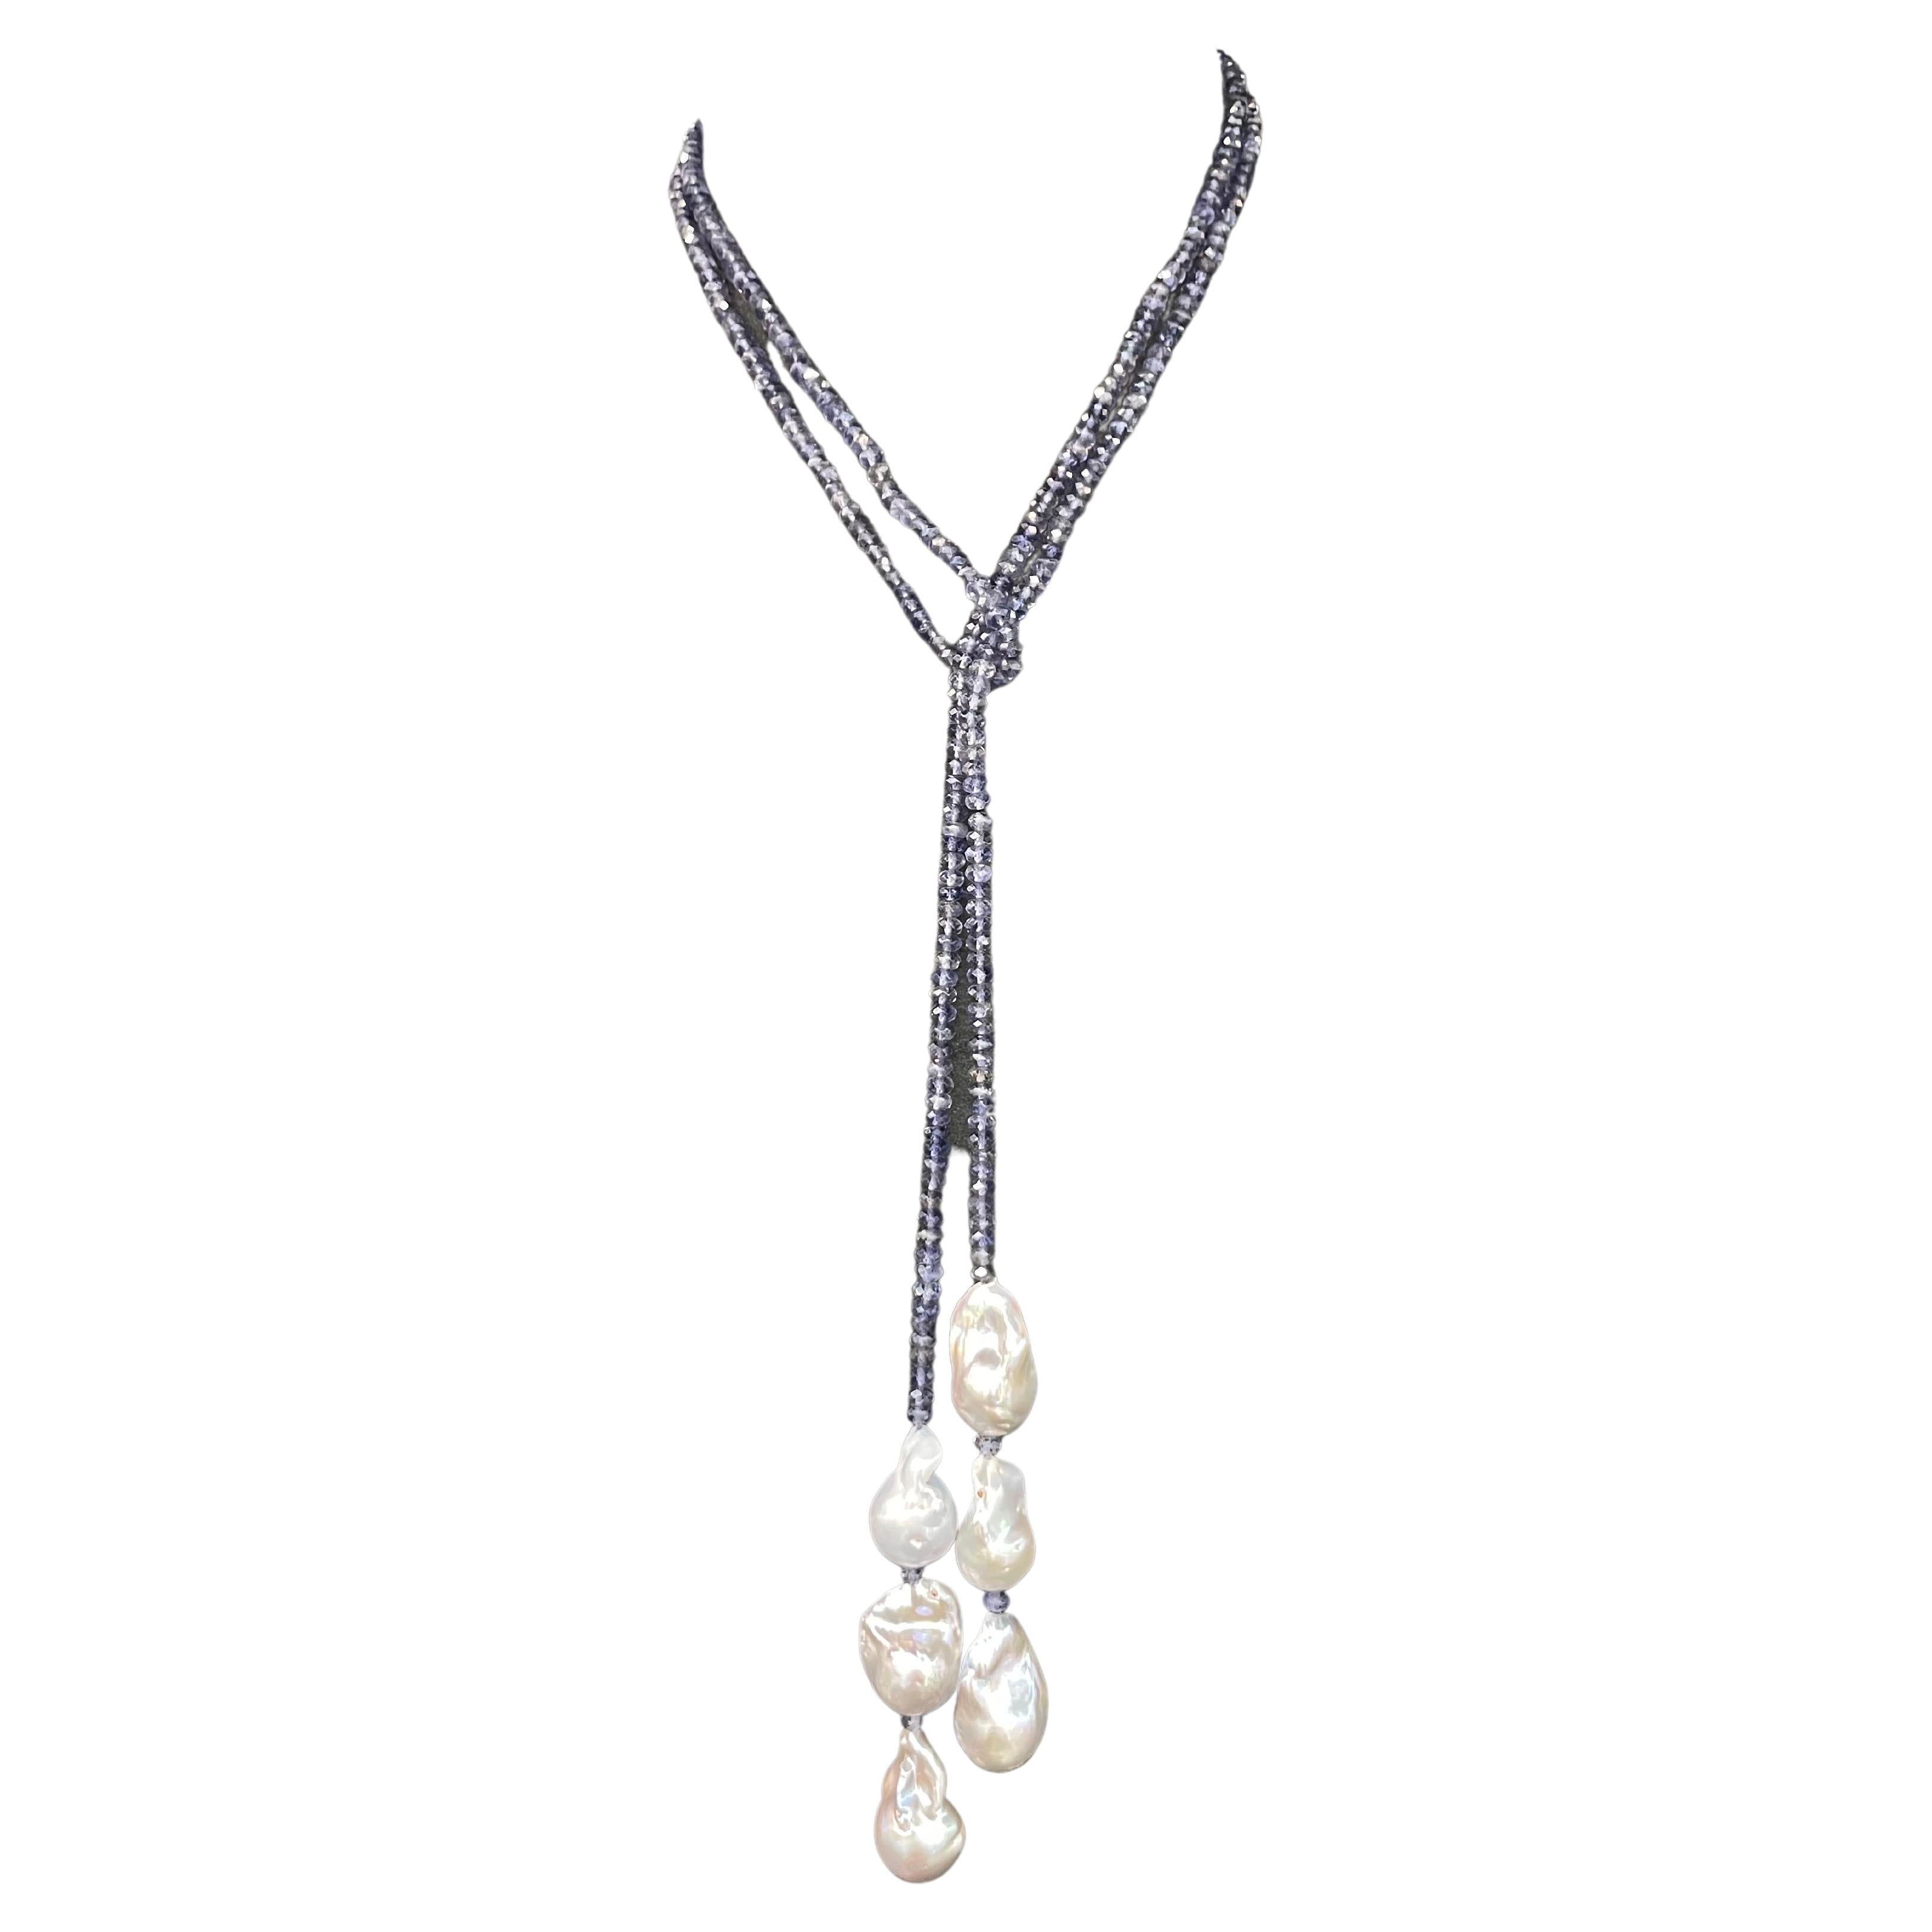 Strand of Iolite Grey Baroque Pearl Tassel Necklace 50 Inches Long